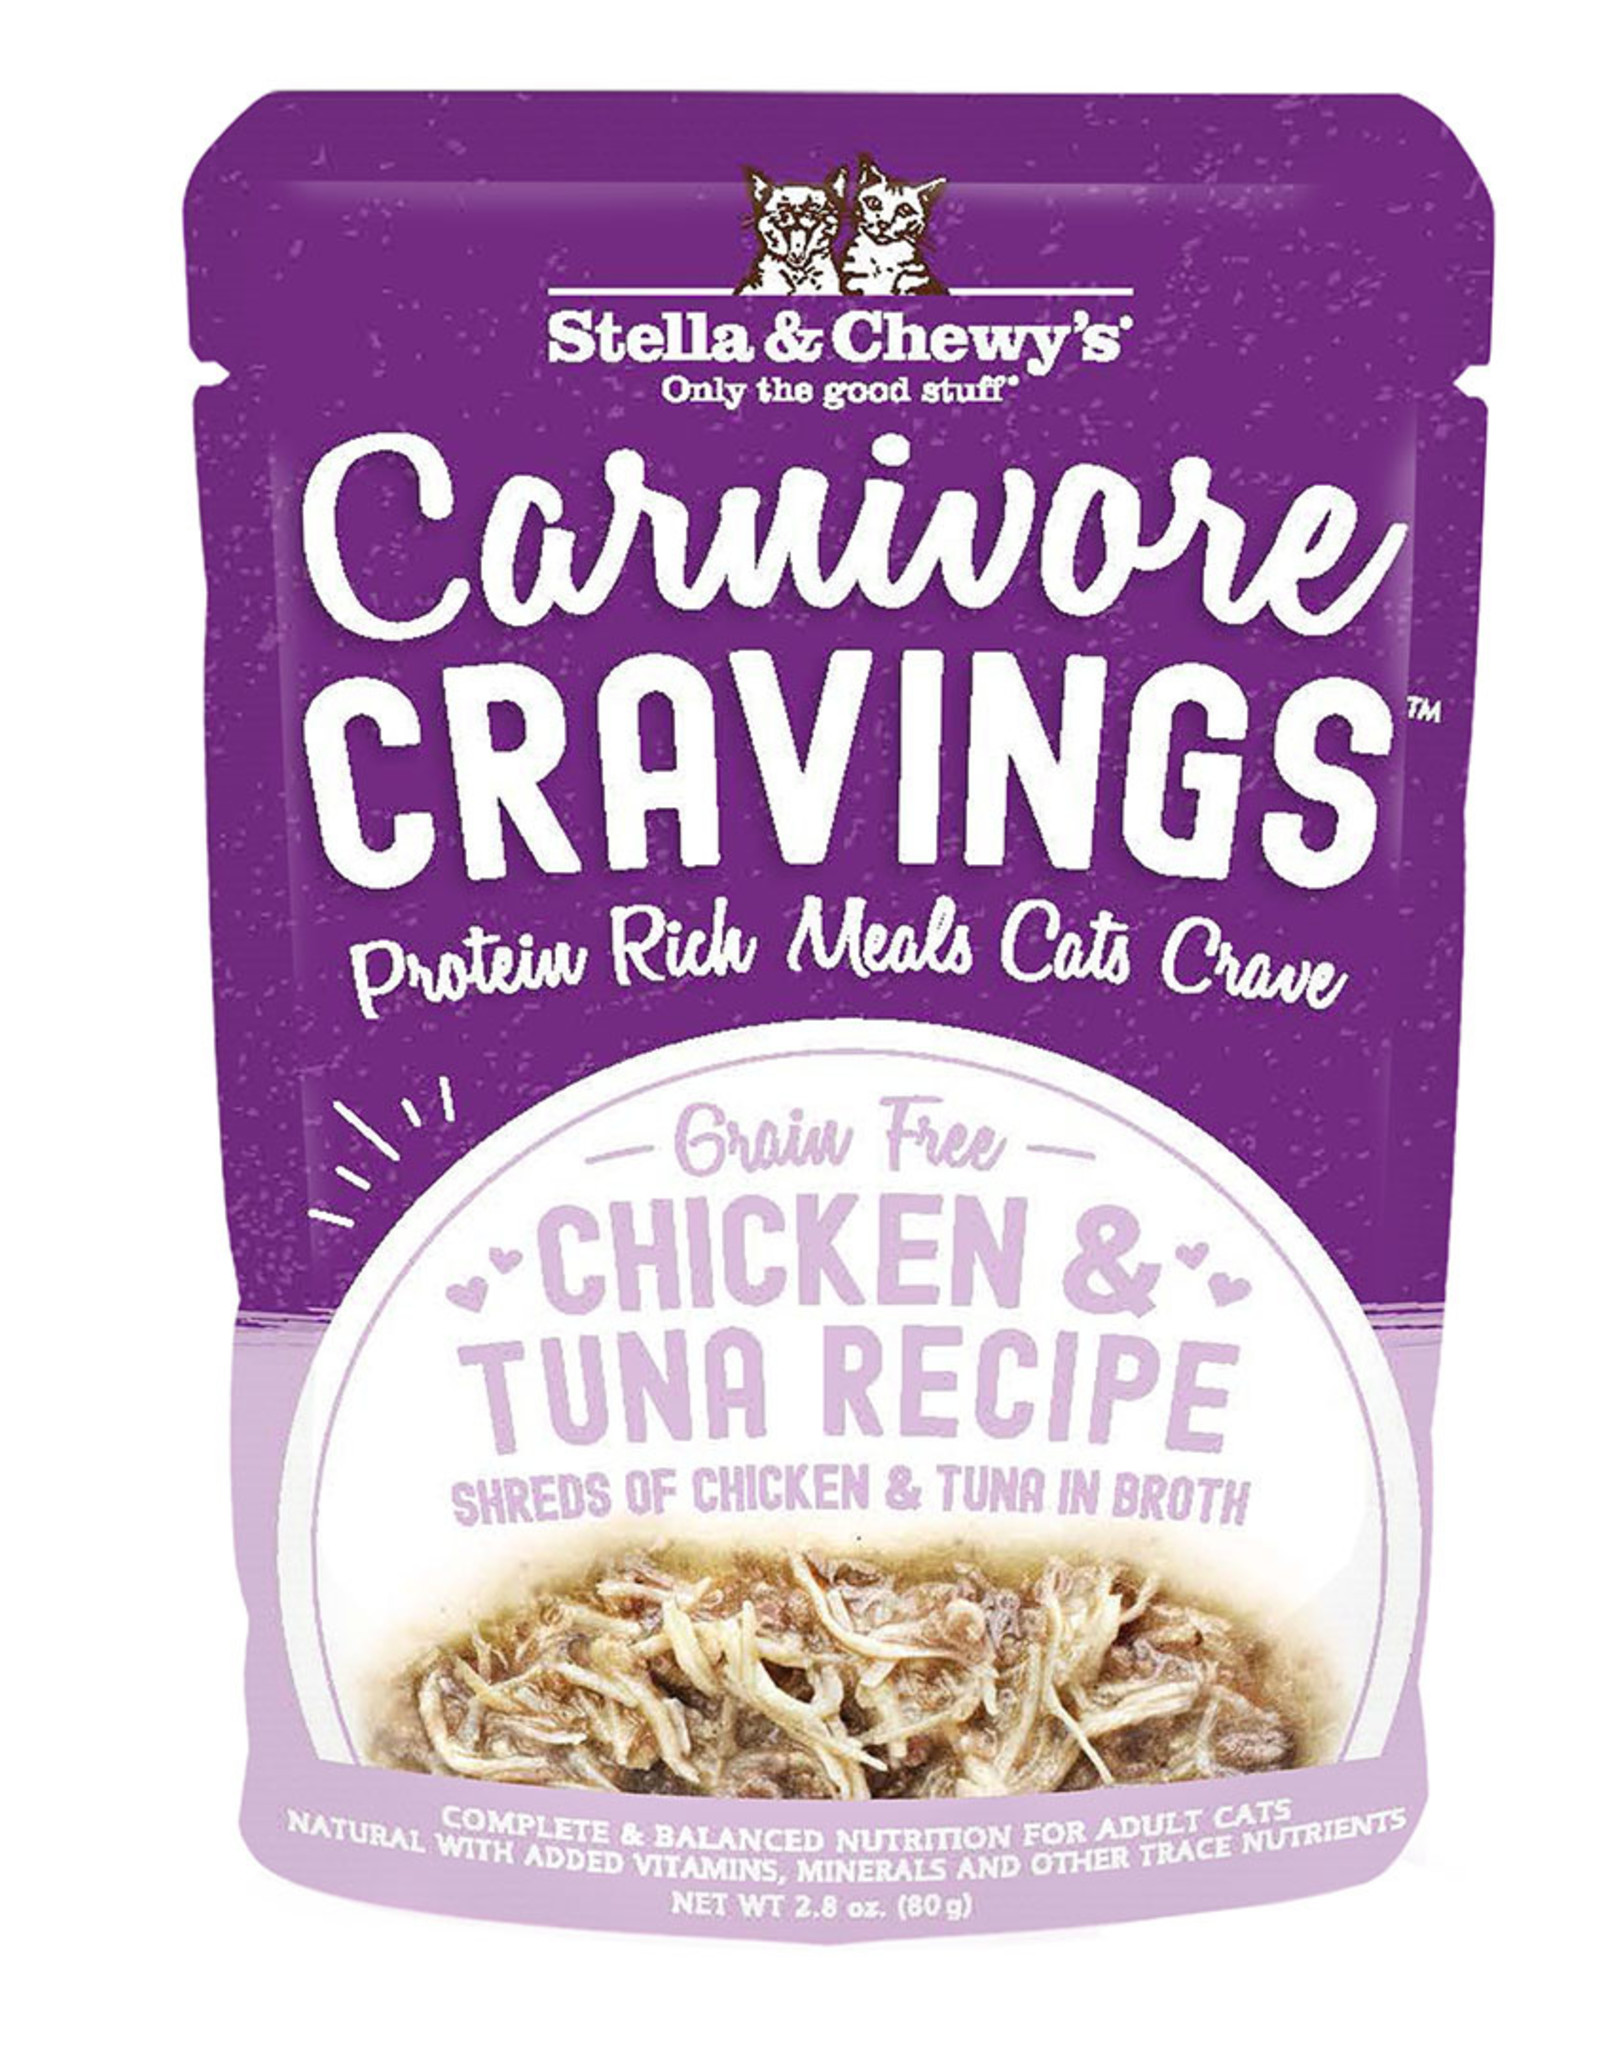 STELLA & CHEWY'S LLC STELLA & CHEWY'S CAT CARNIVORE CRAVINGS CHICKEN & TUNA 2.8OZ CASE OF 24